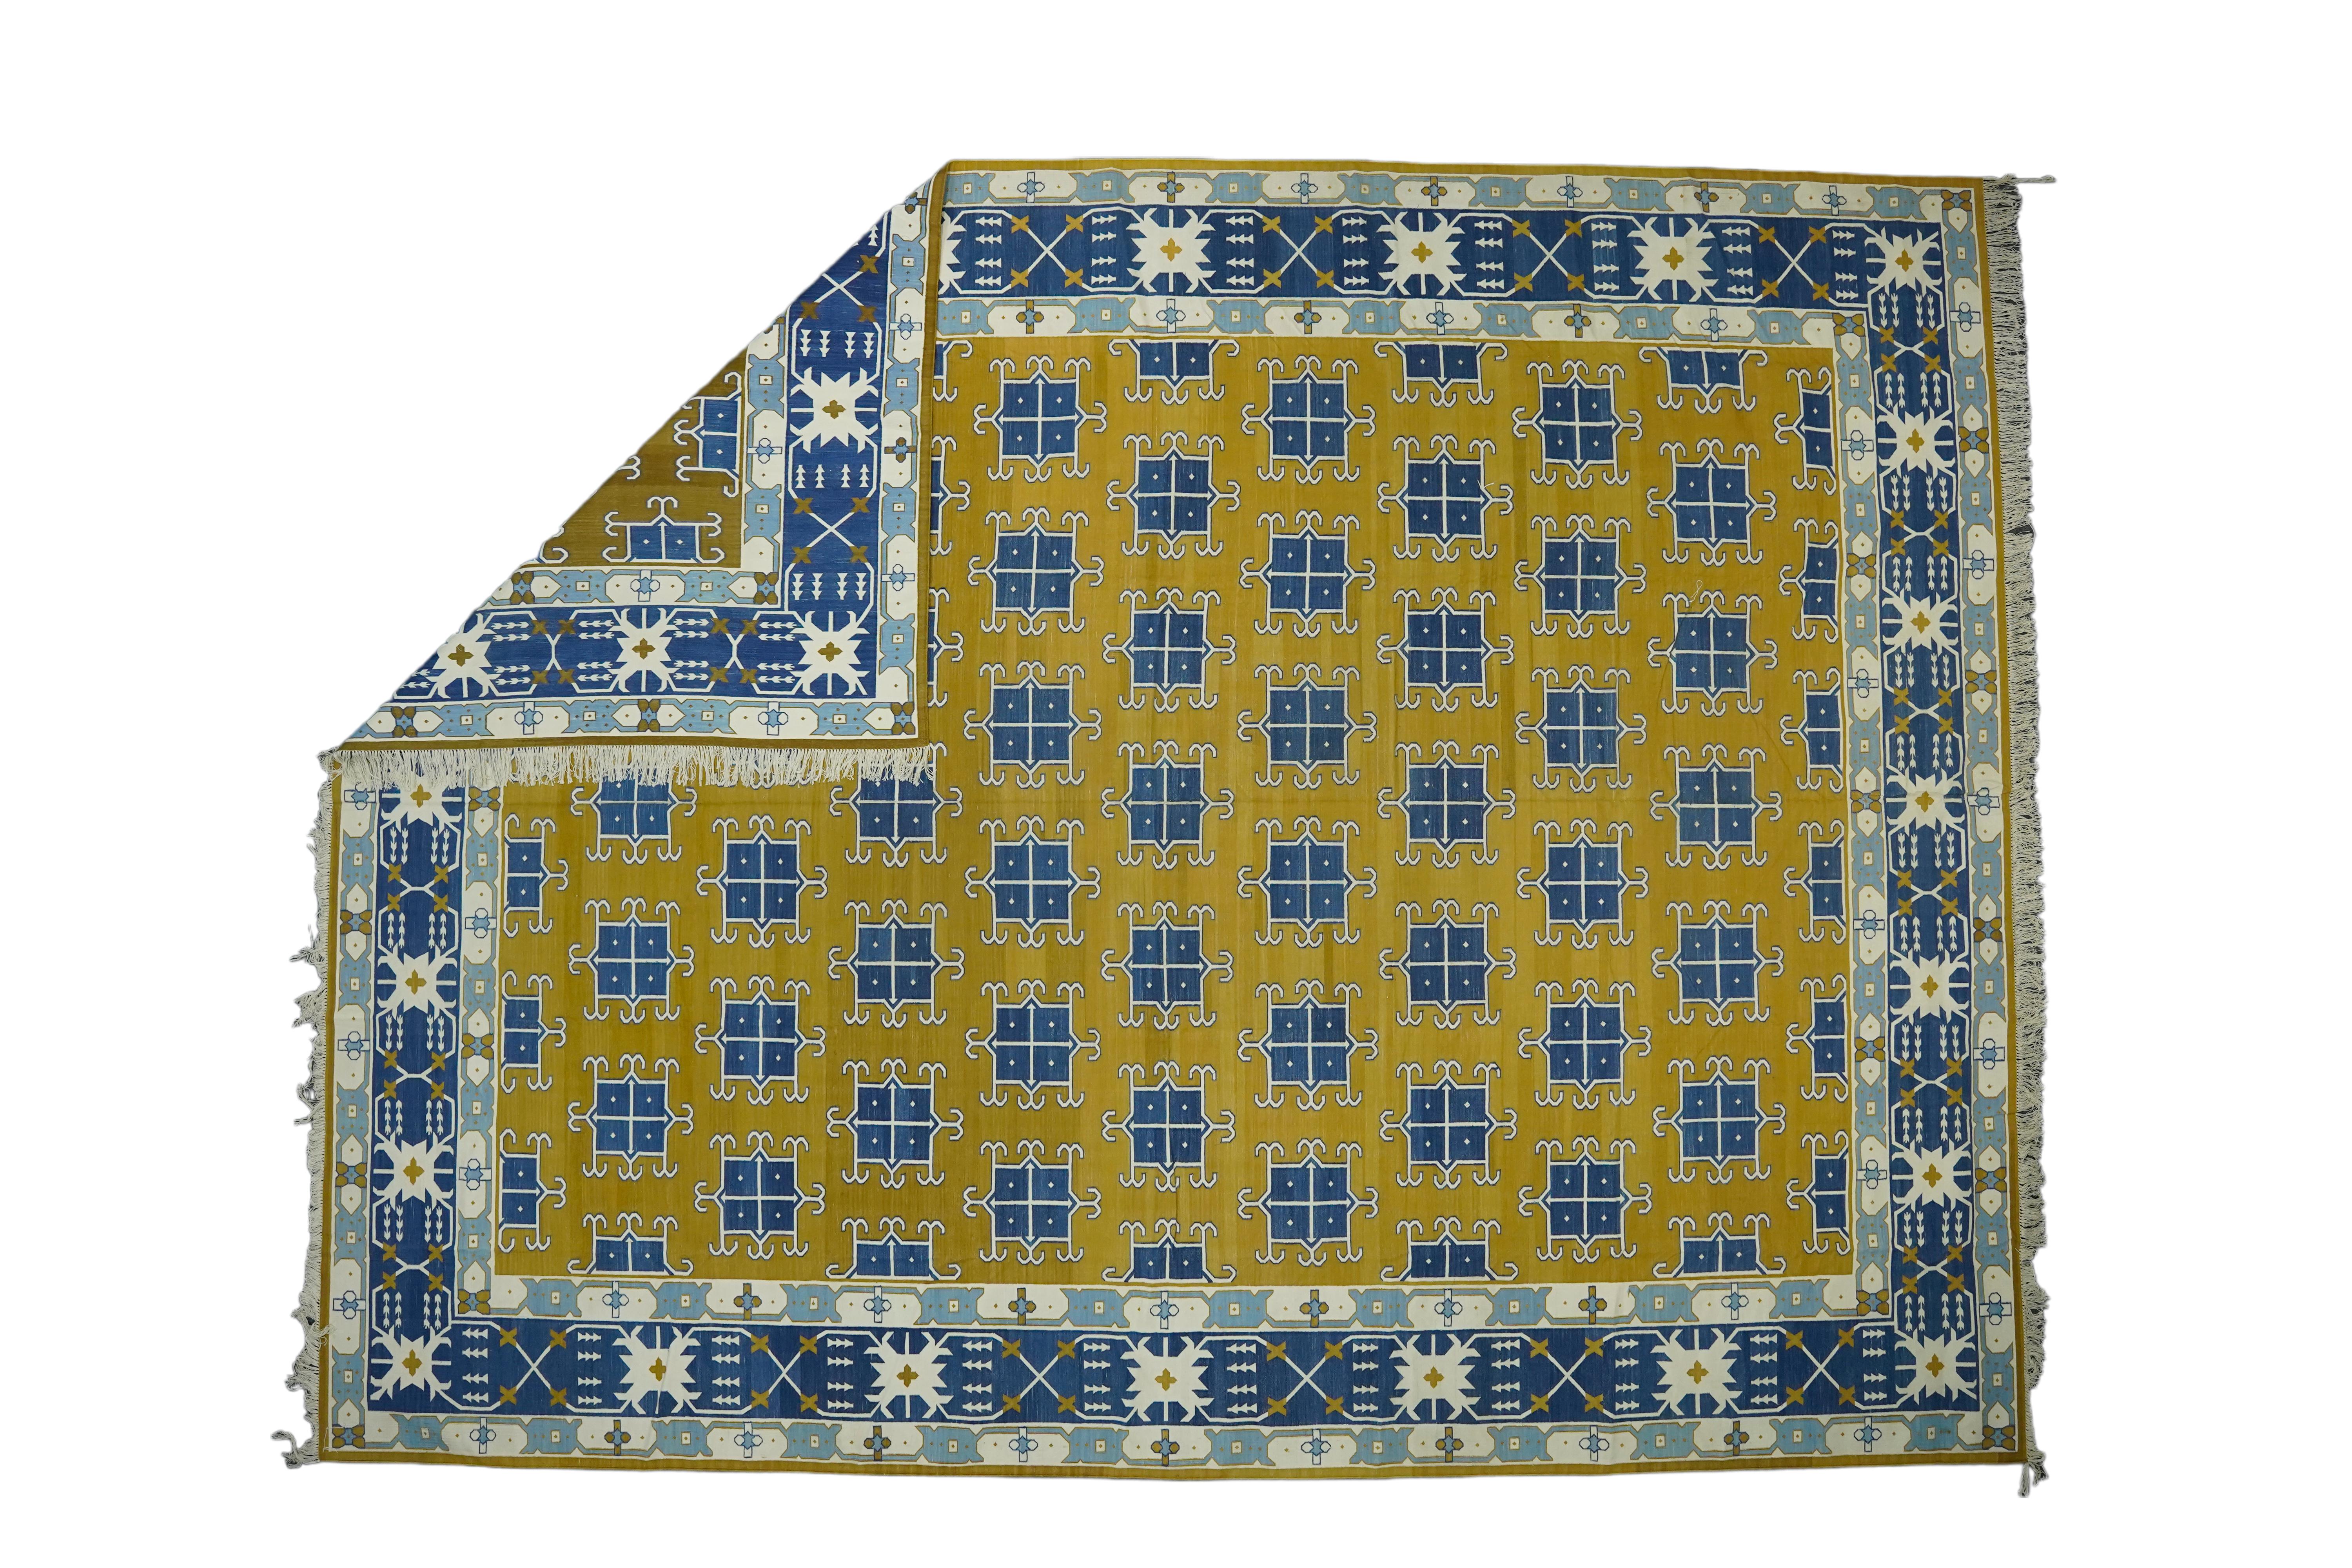 This 12x16 rug is a rare vintage Dhurrie rug from an exciting new mid-century curation by Rug & Kilim. Handwoven in a wool flatweave, it originates from India circa 1950-1960, and enjoys a gold field with blue geometric patterns and white accents.